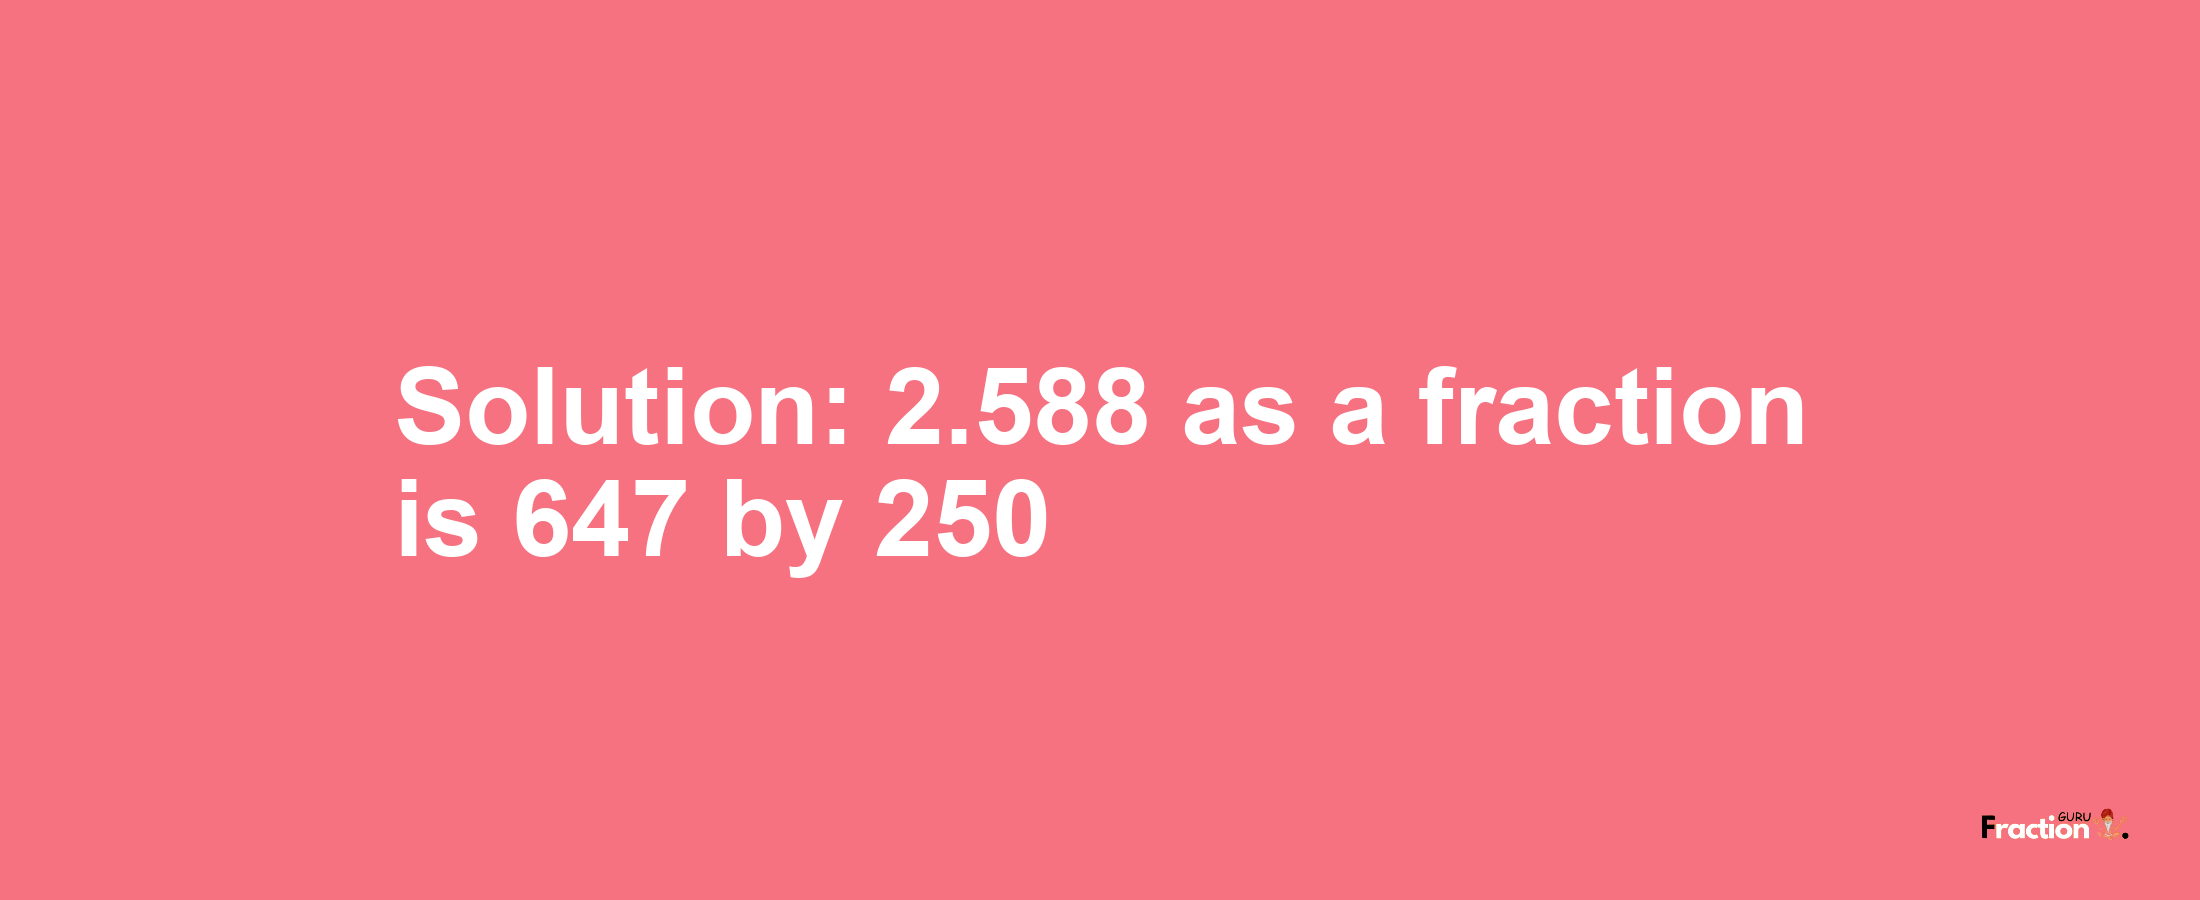 Solution:2.588 as a fraction is 647/250